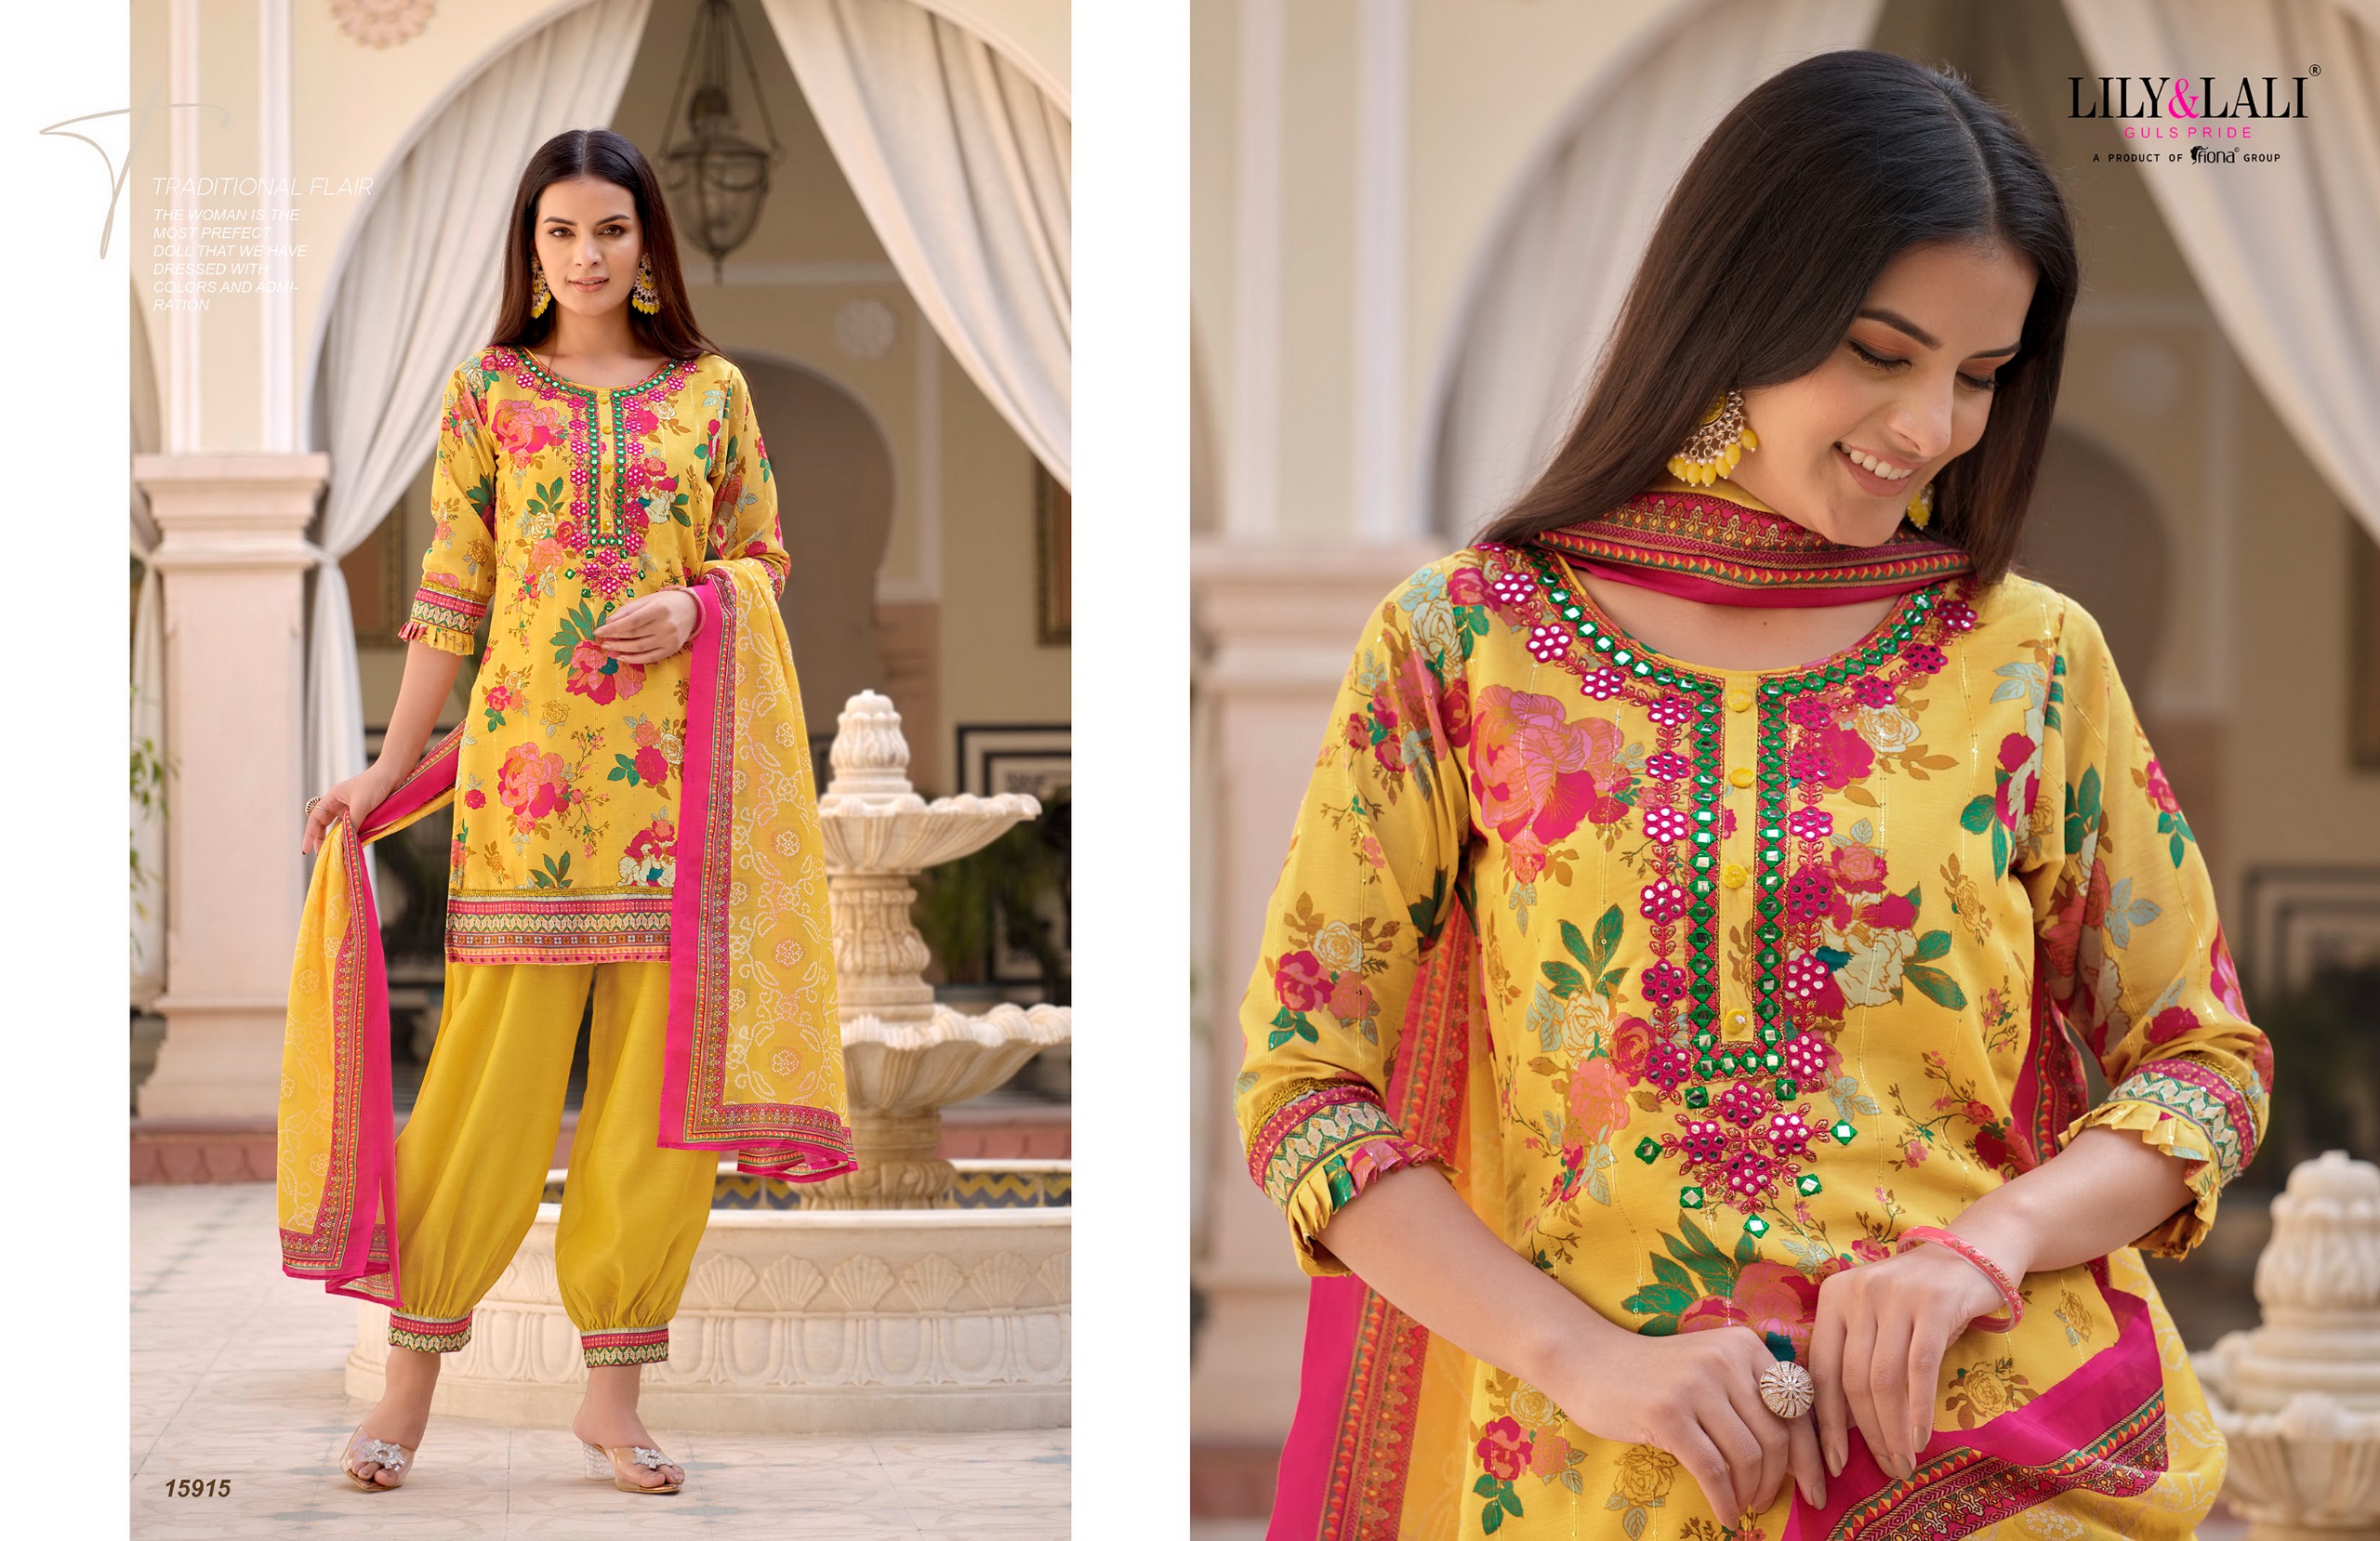 Lily And Lali Mehnoor collection 4